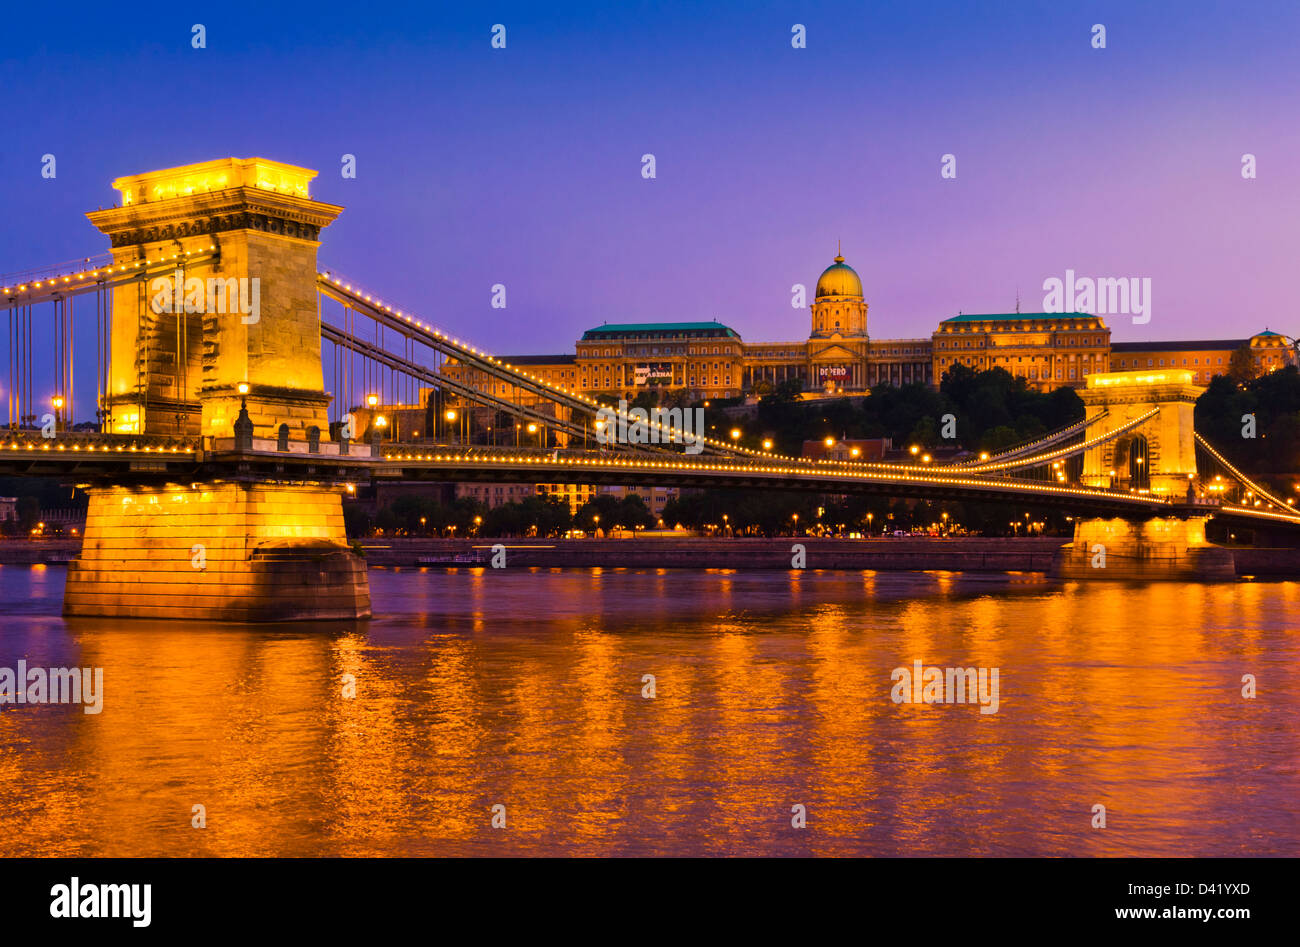 The Chain Bridge Szechenyi Lanchid over the river Danube at sunset with the Hungarian National Gallery Budapest, Hungary, EU,Europe Stock Photo